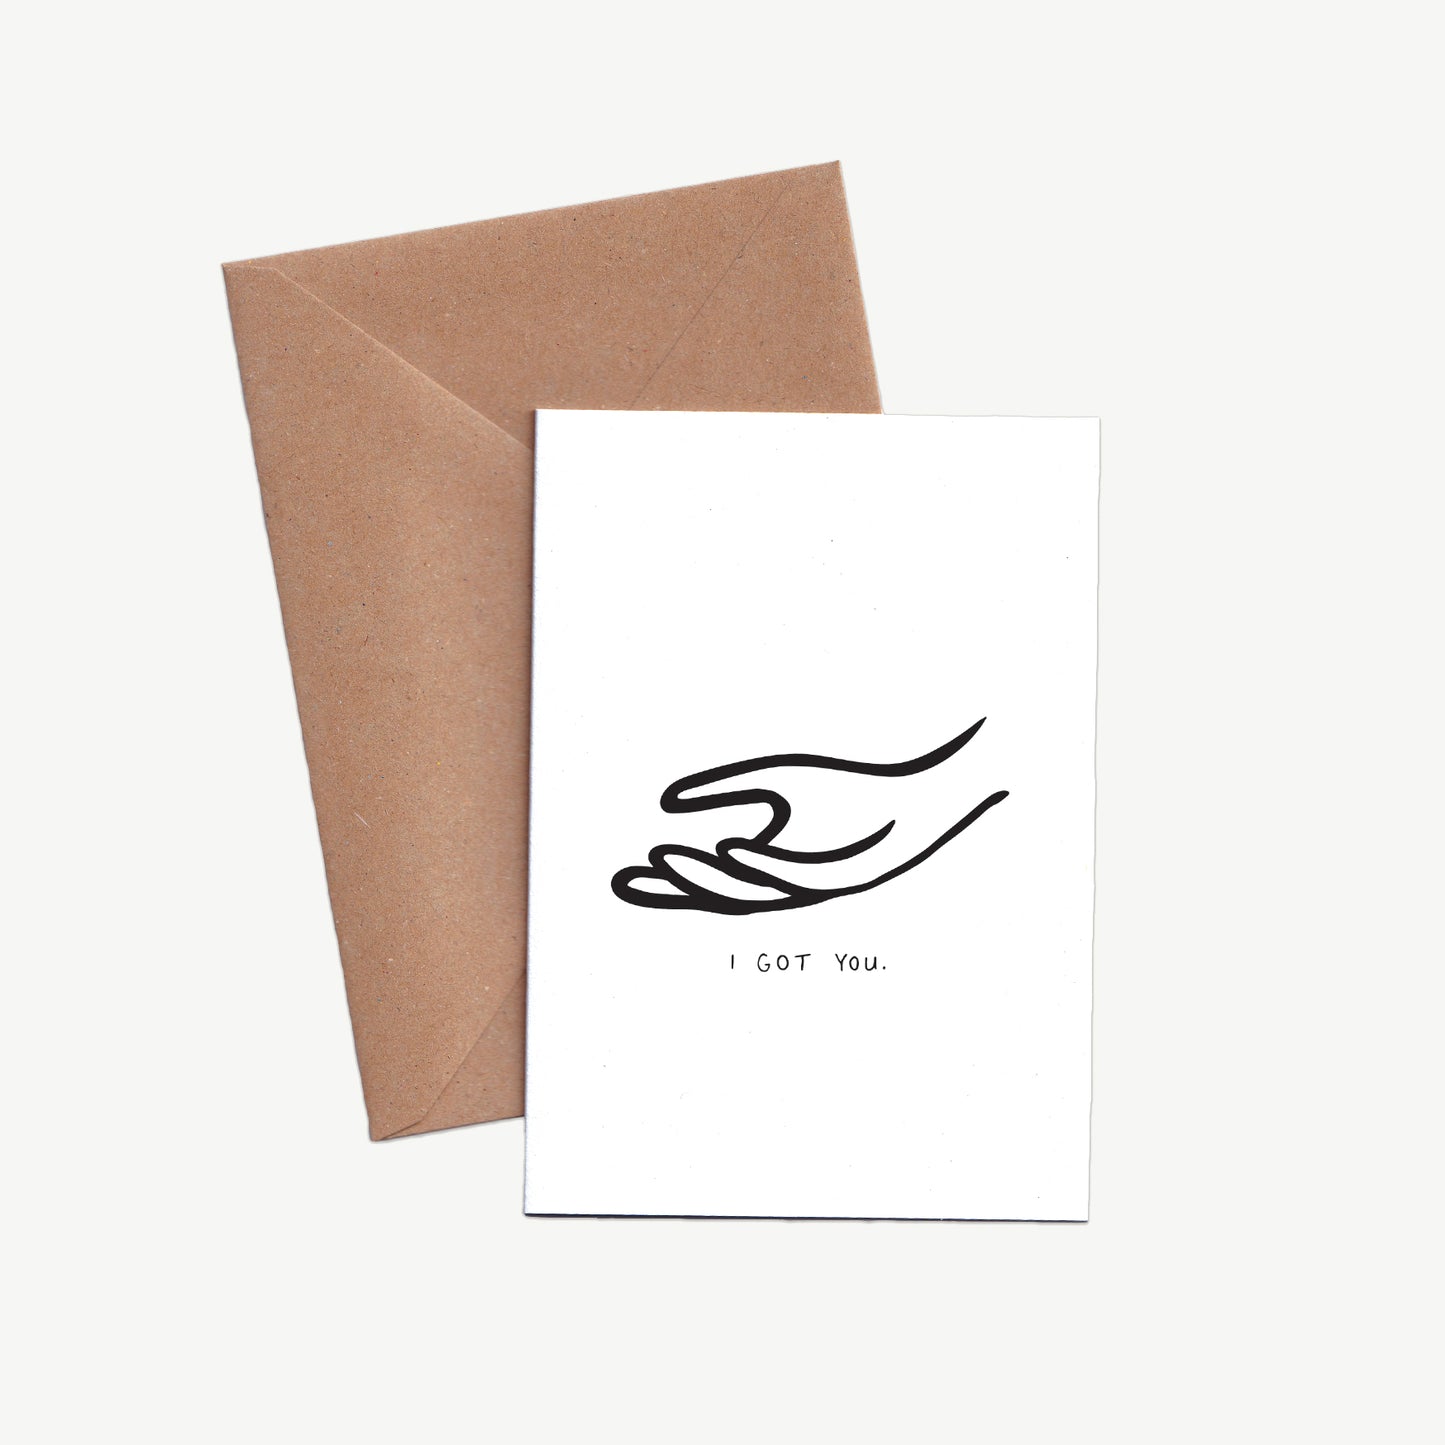 A Sympathy Card designed in simple black lines of an offering hand with the words I got you written underneath. Displayed with a kraft envelope